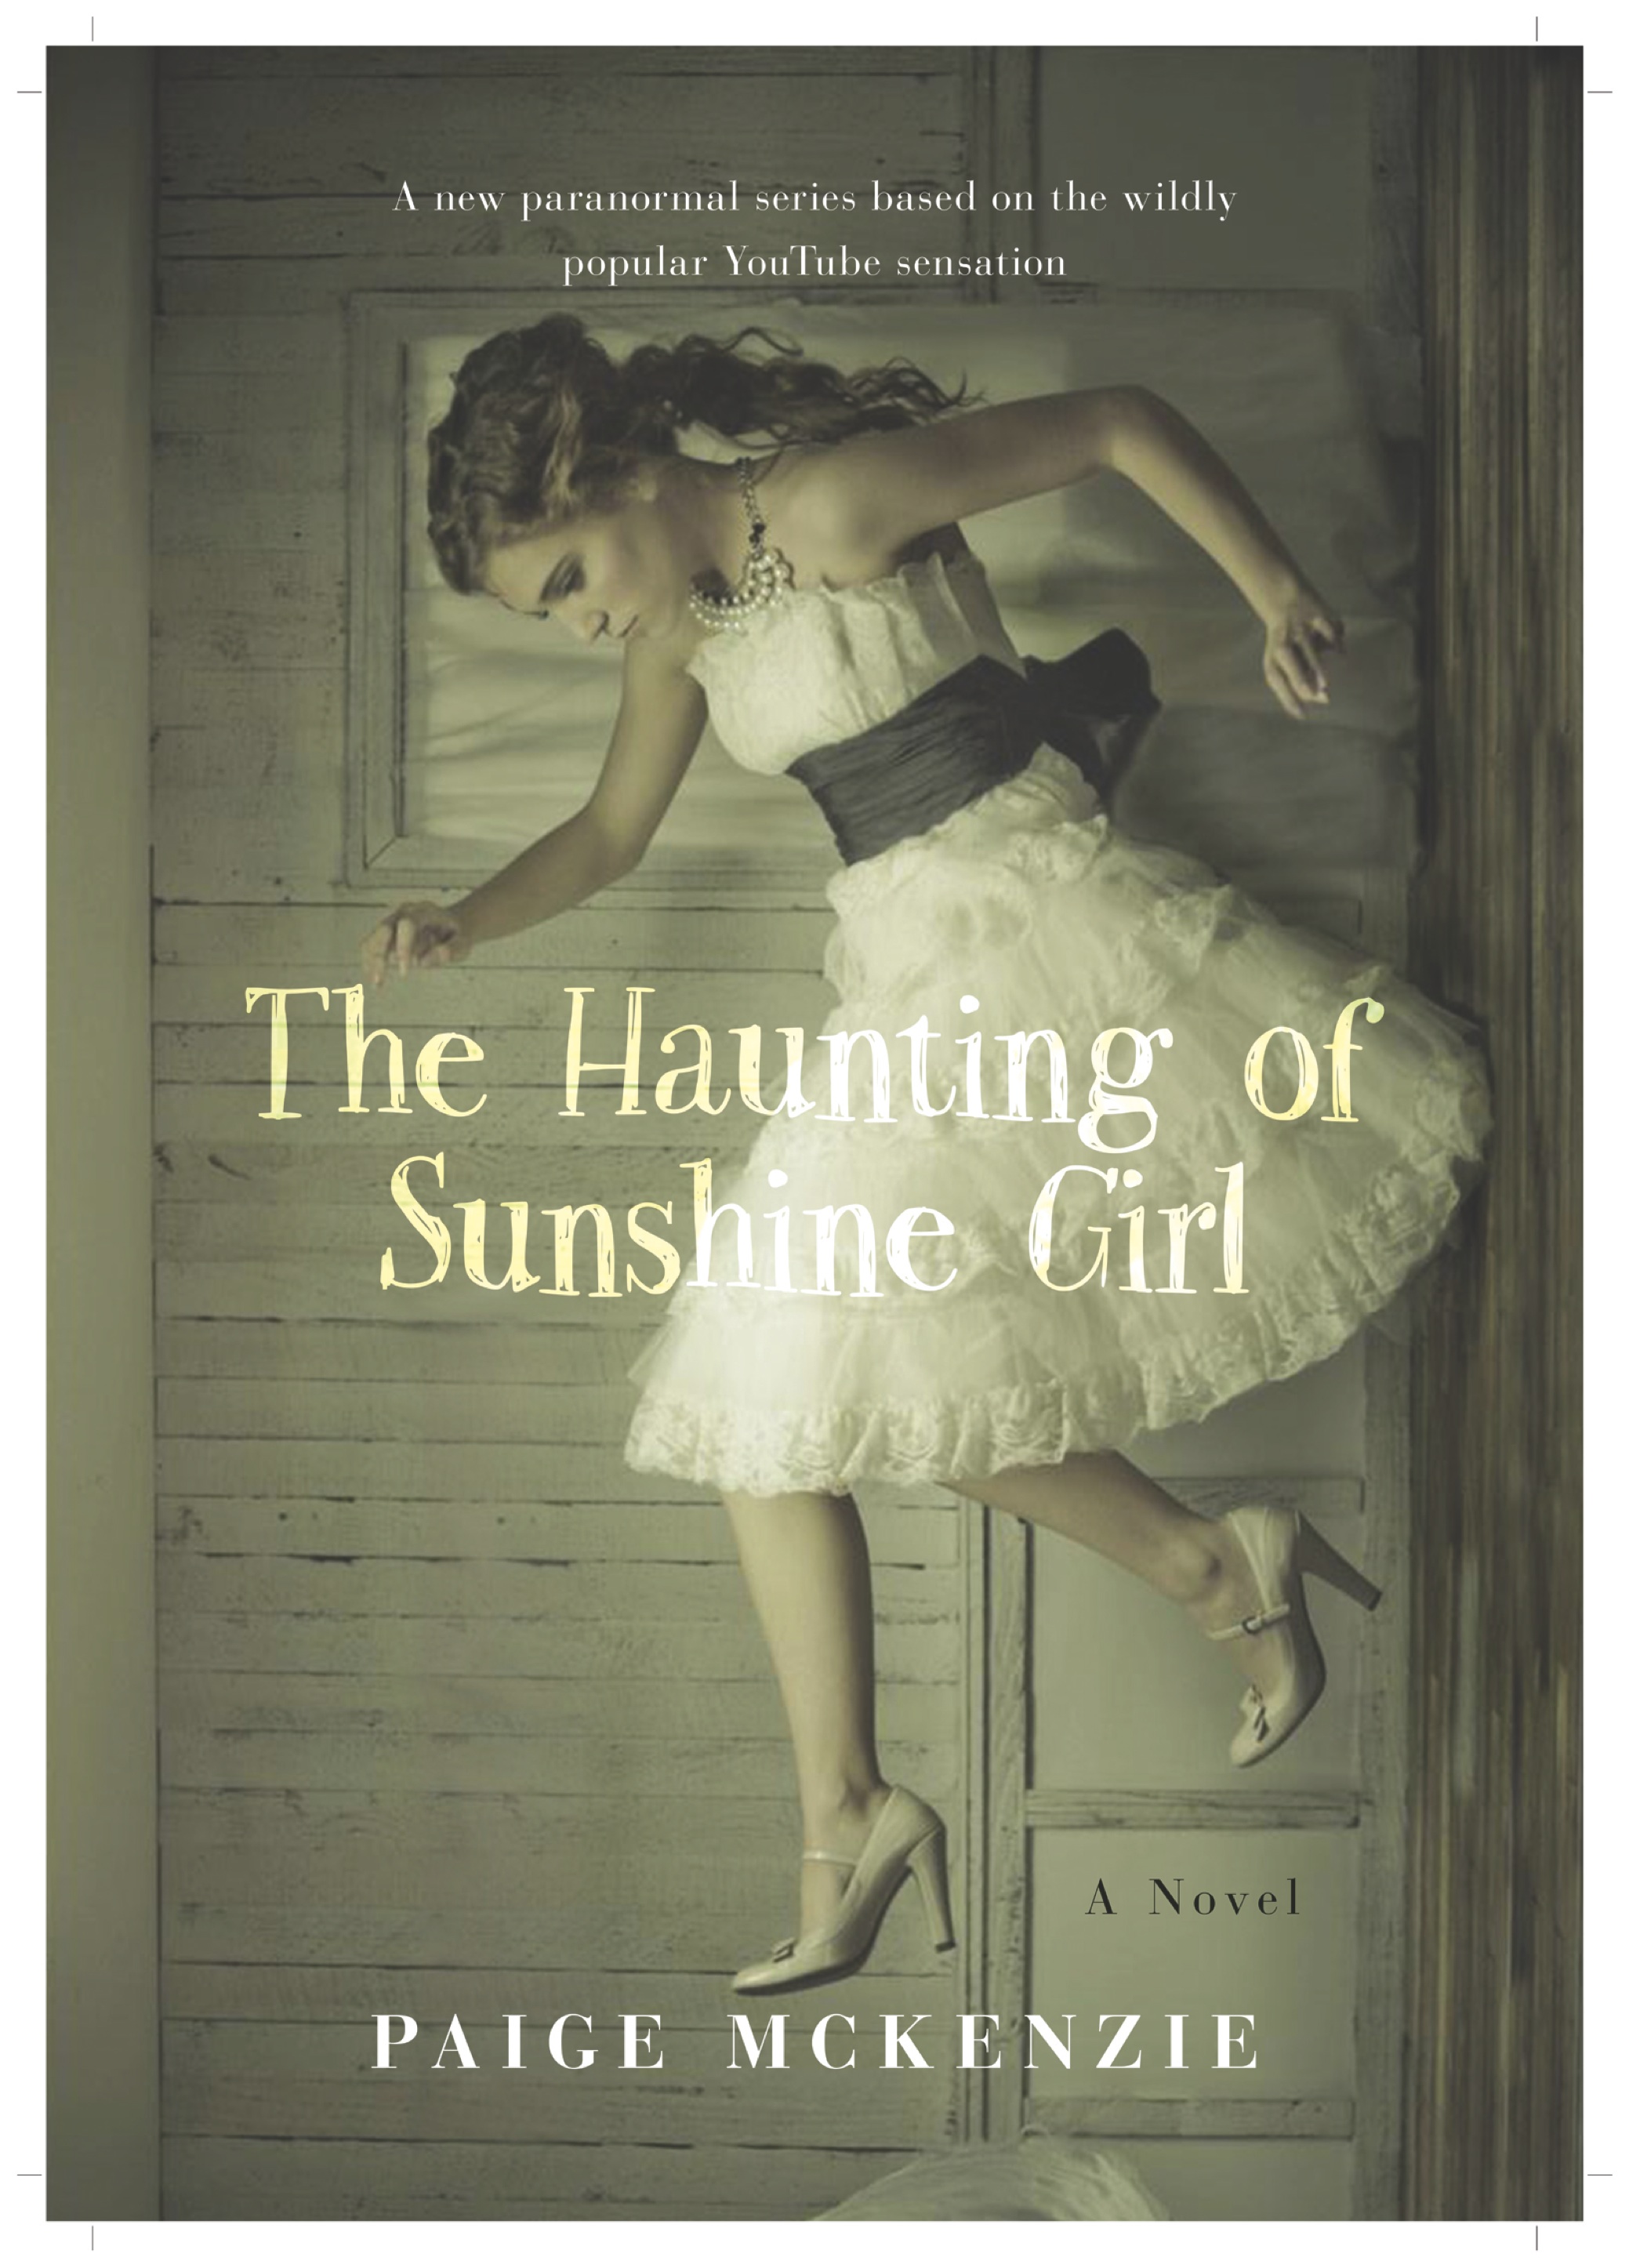 The book cover for The Haunting of Sunshine Girl, book one